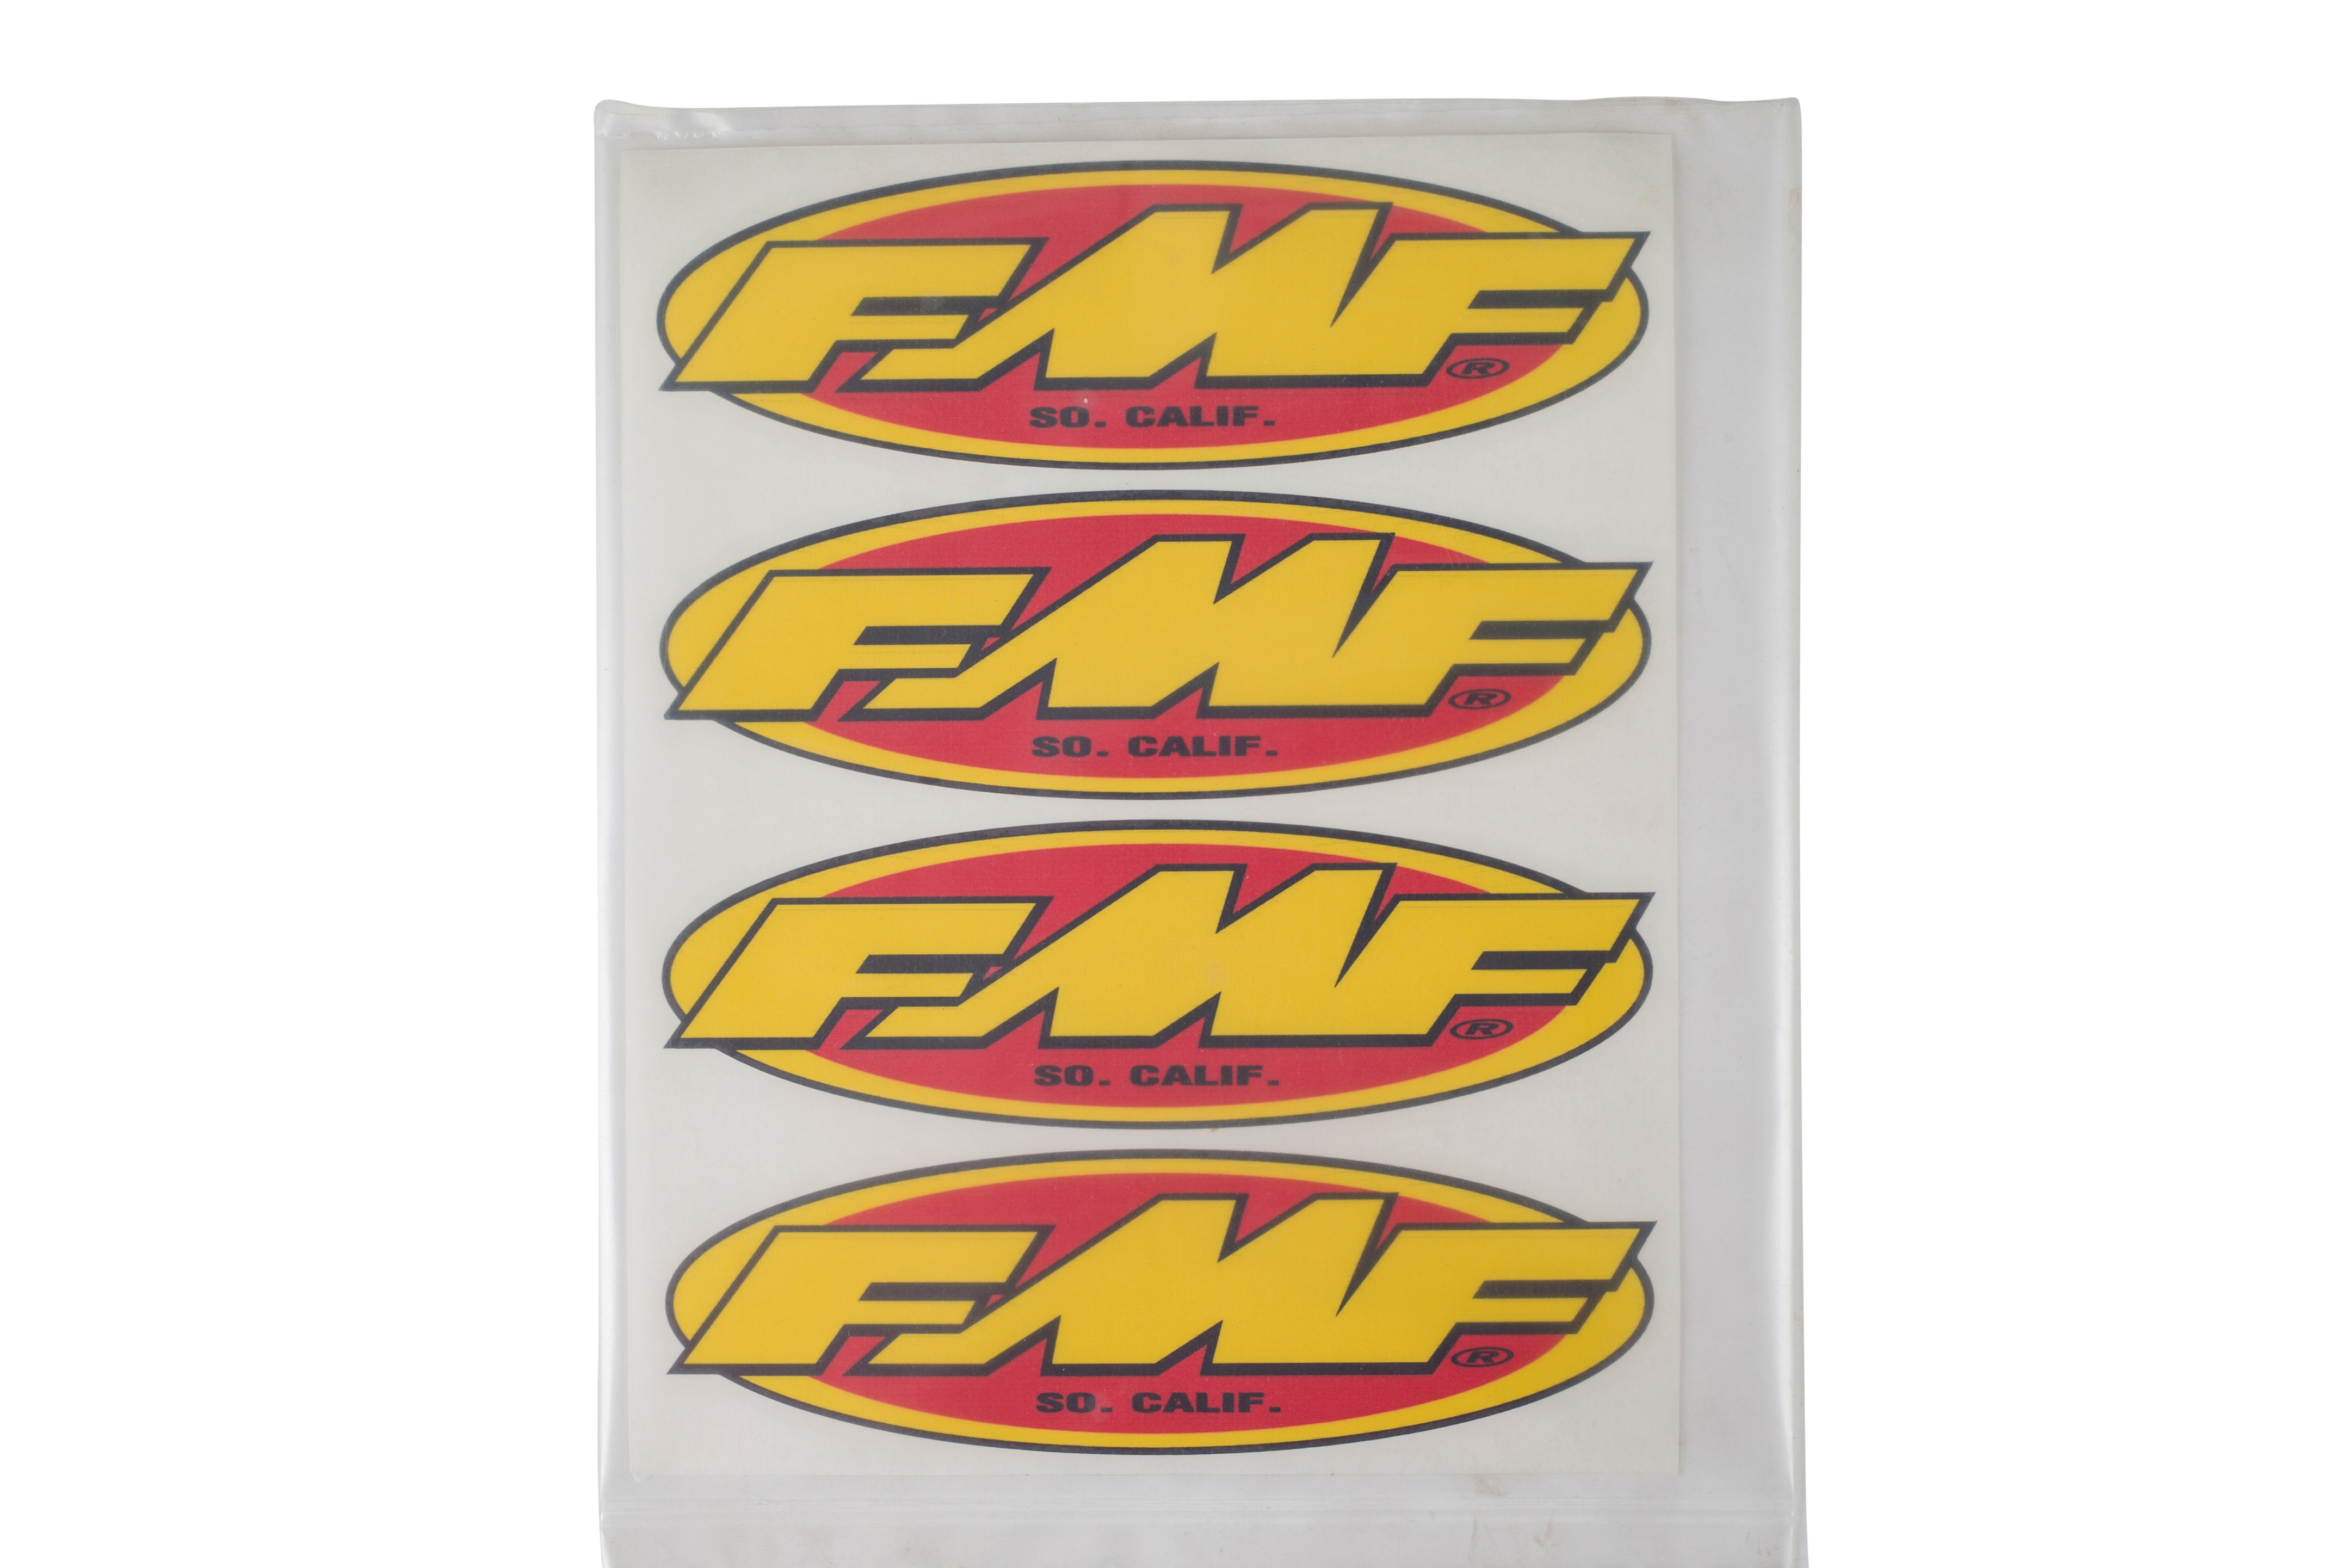 FMF OVAL 7" IRON ON JERSEY TRANSFER (4 PACK) (014804)